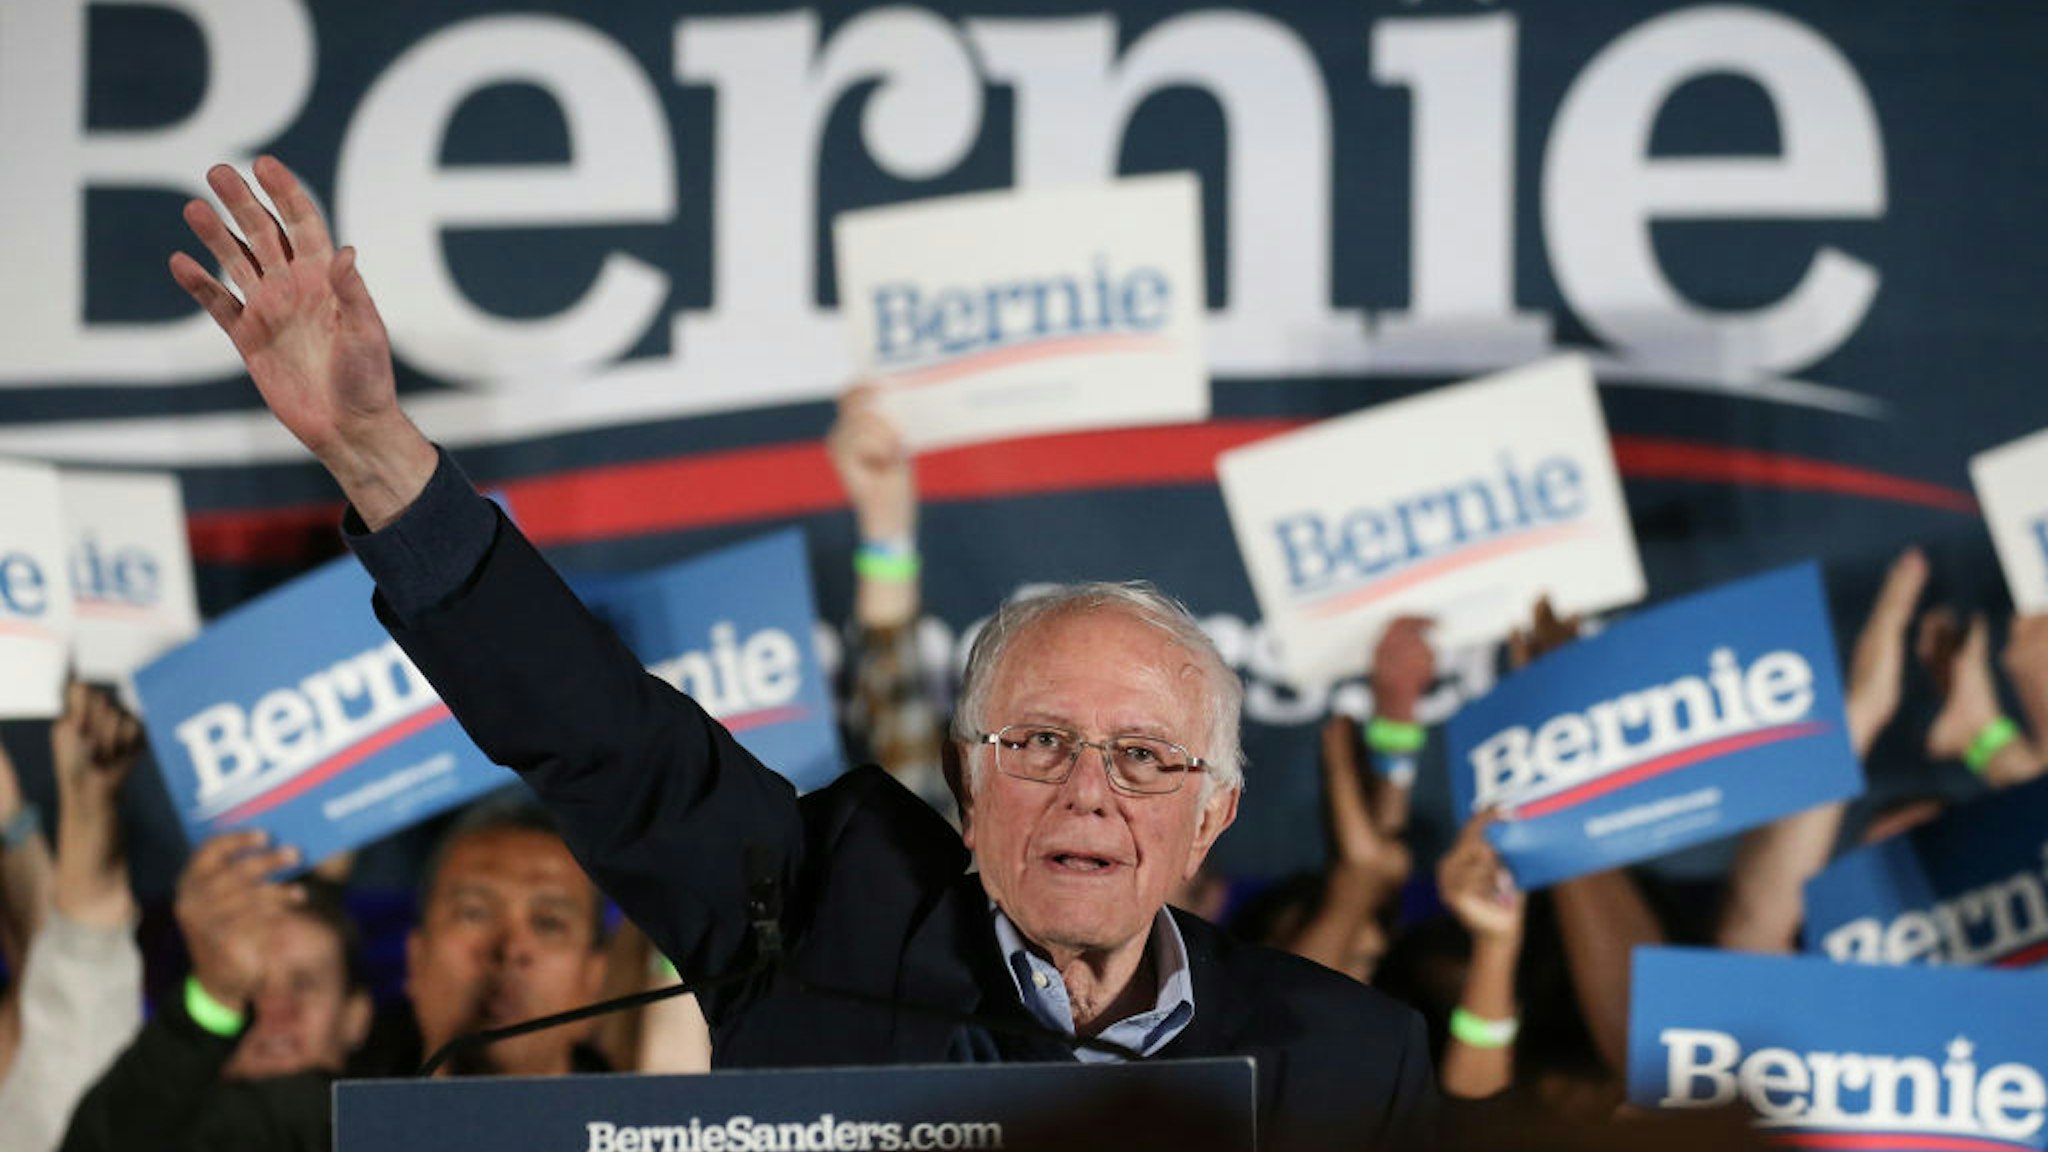 Democratic presidential candidate Sen. Bernie Sanders (I-VT) waves to supporters at a campaign rally for Sanders on February 21, 2020 in Las Vegas, Nevada.